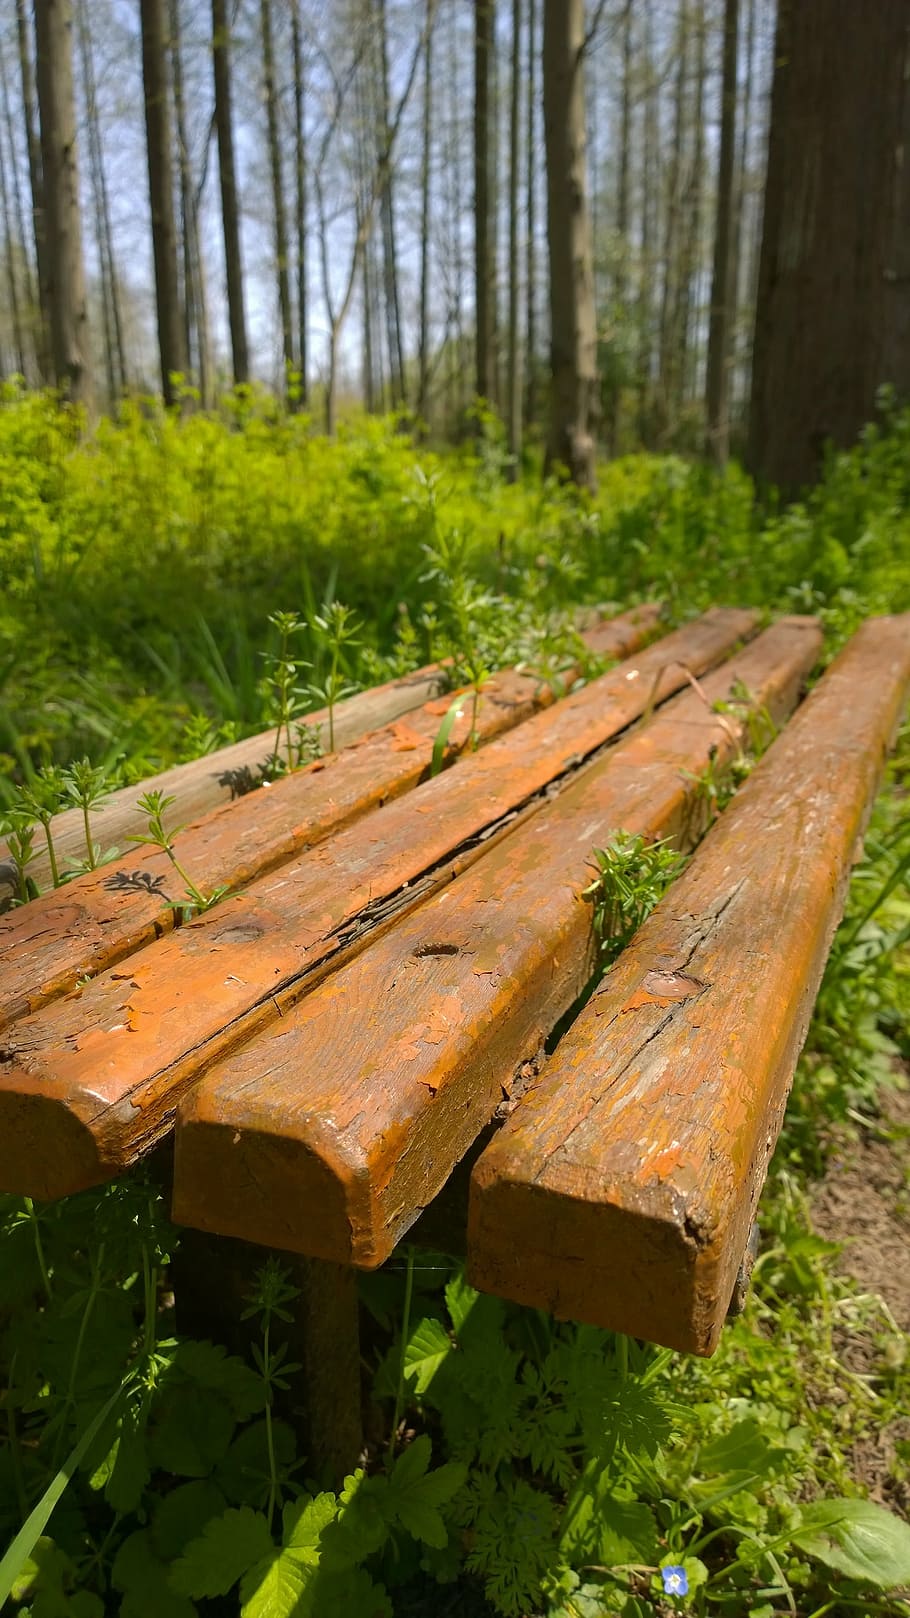 forest, wooden stool, grassland, plant, tree, wood - material